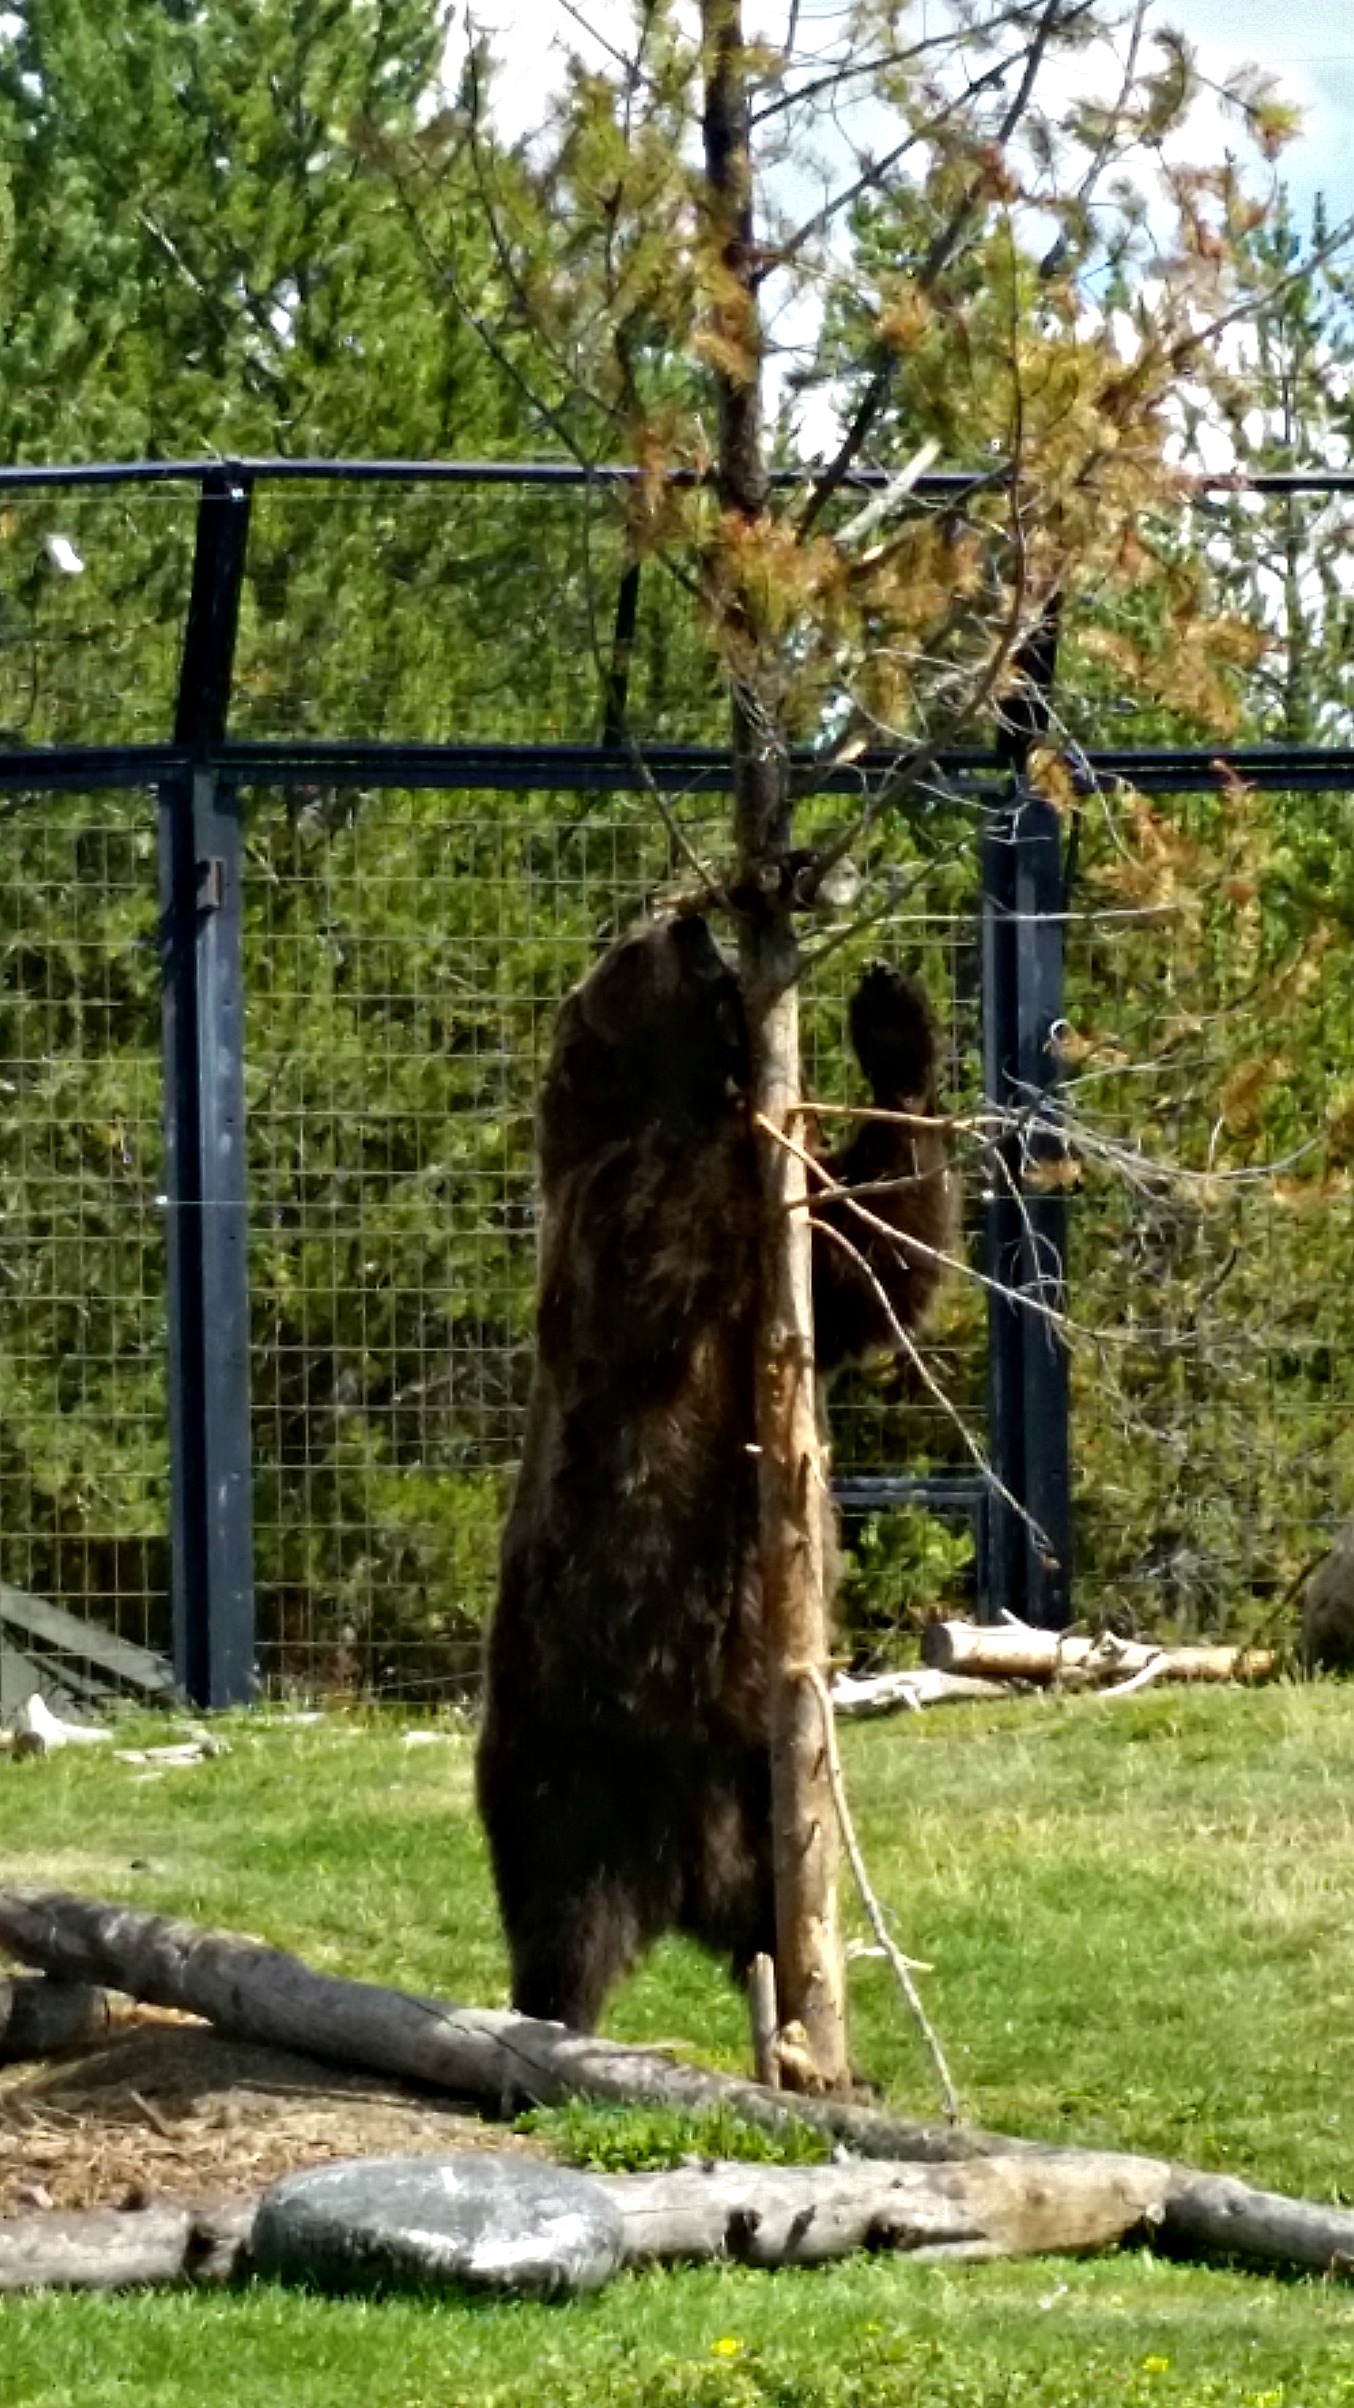 Grizzly Bear deciding to use some brute bear strength in search of the Peanut Butter hidden in the tree.